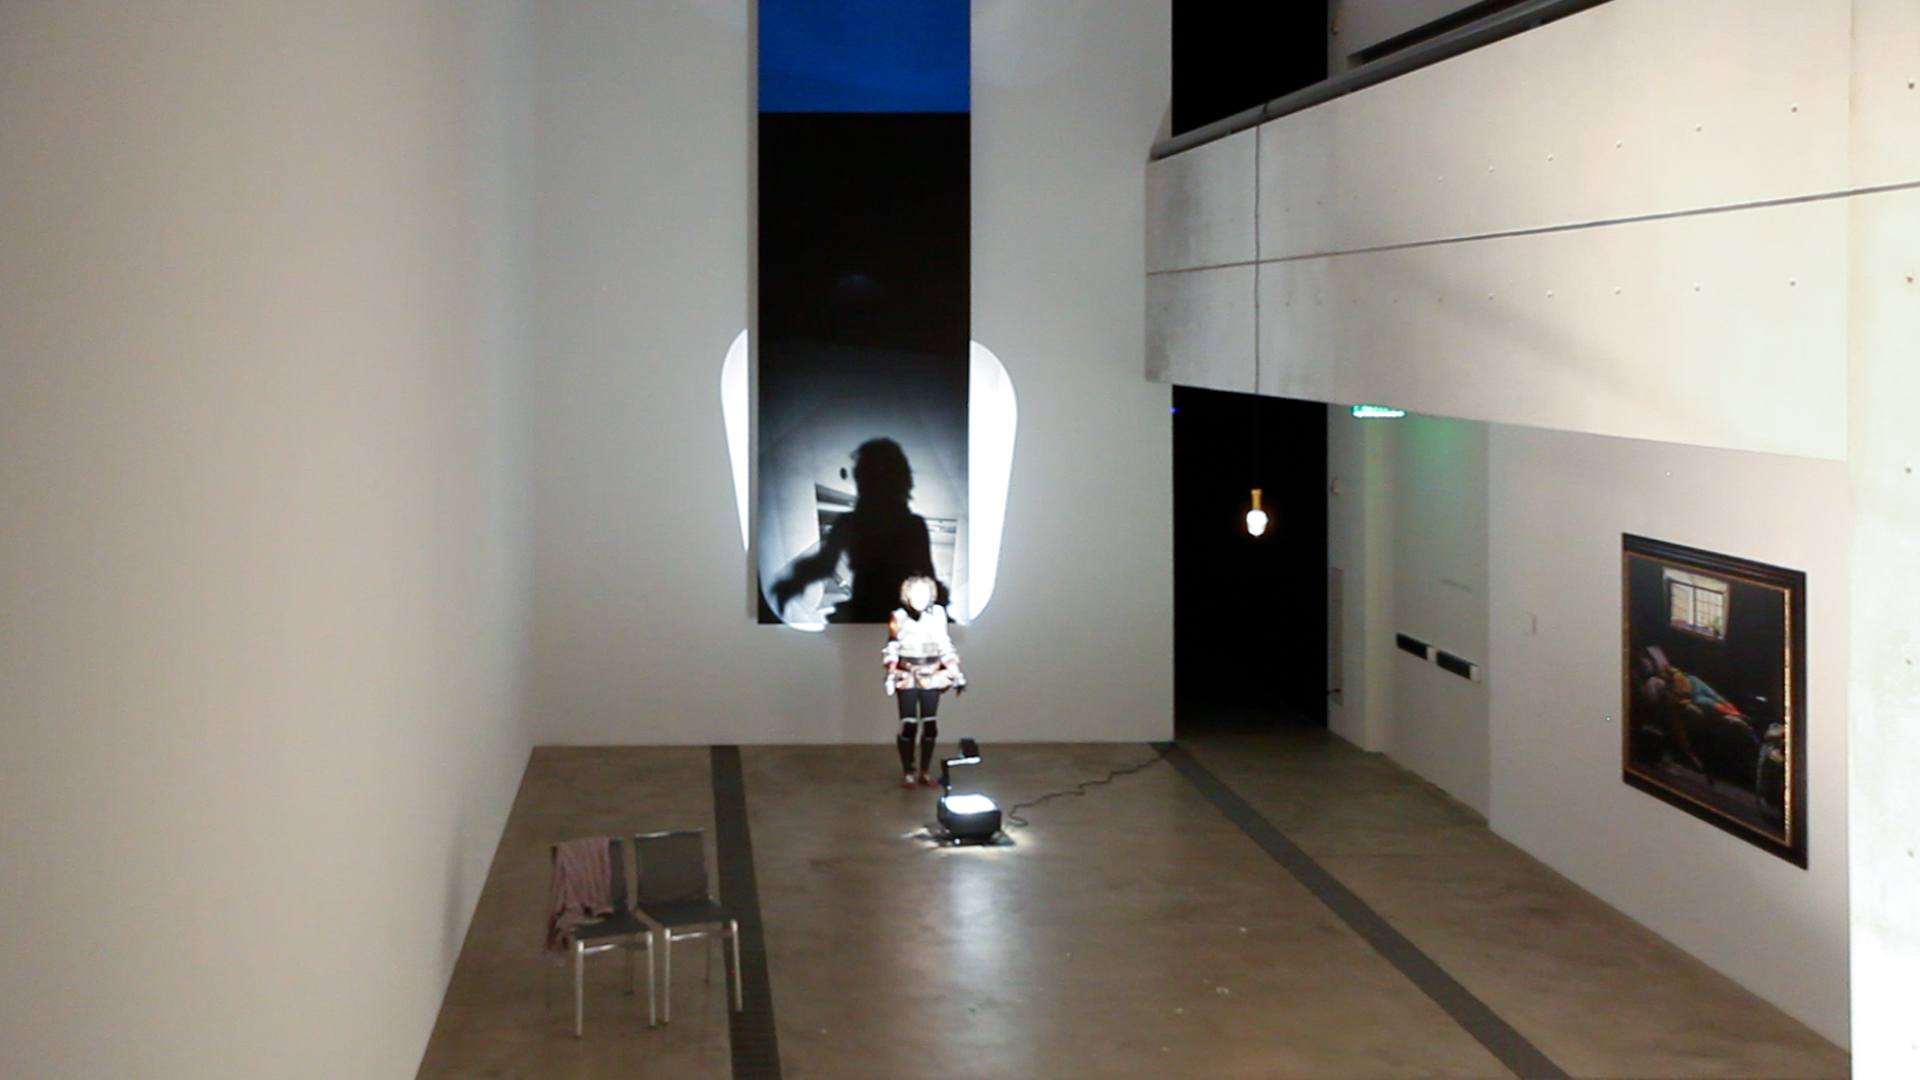 Wura-Natasha performs with an overhead projector on the floor shining a light on her and projecting a shadow onto “Blue Black” by Ellsworth Kelly.